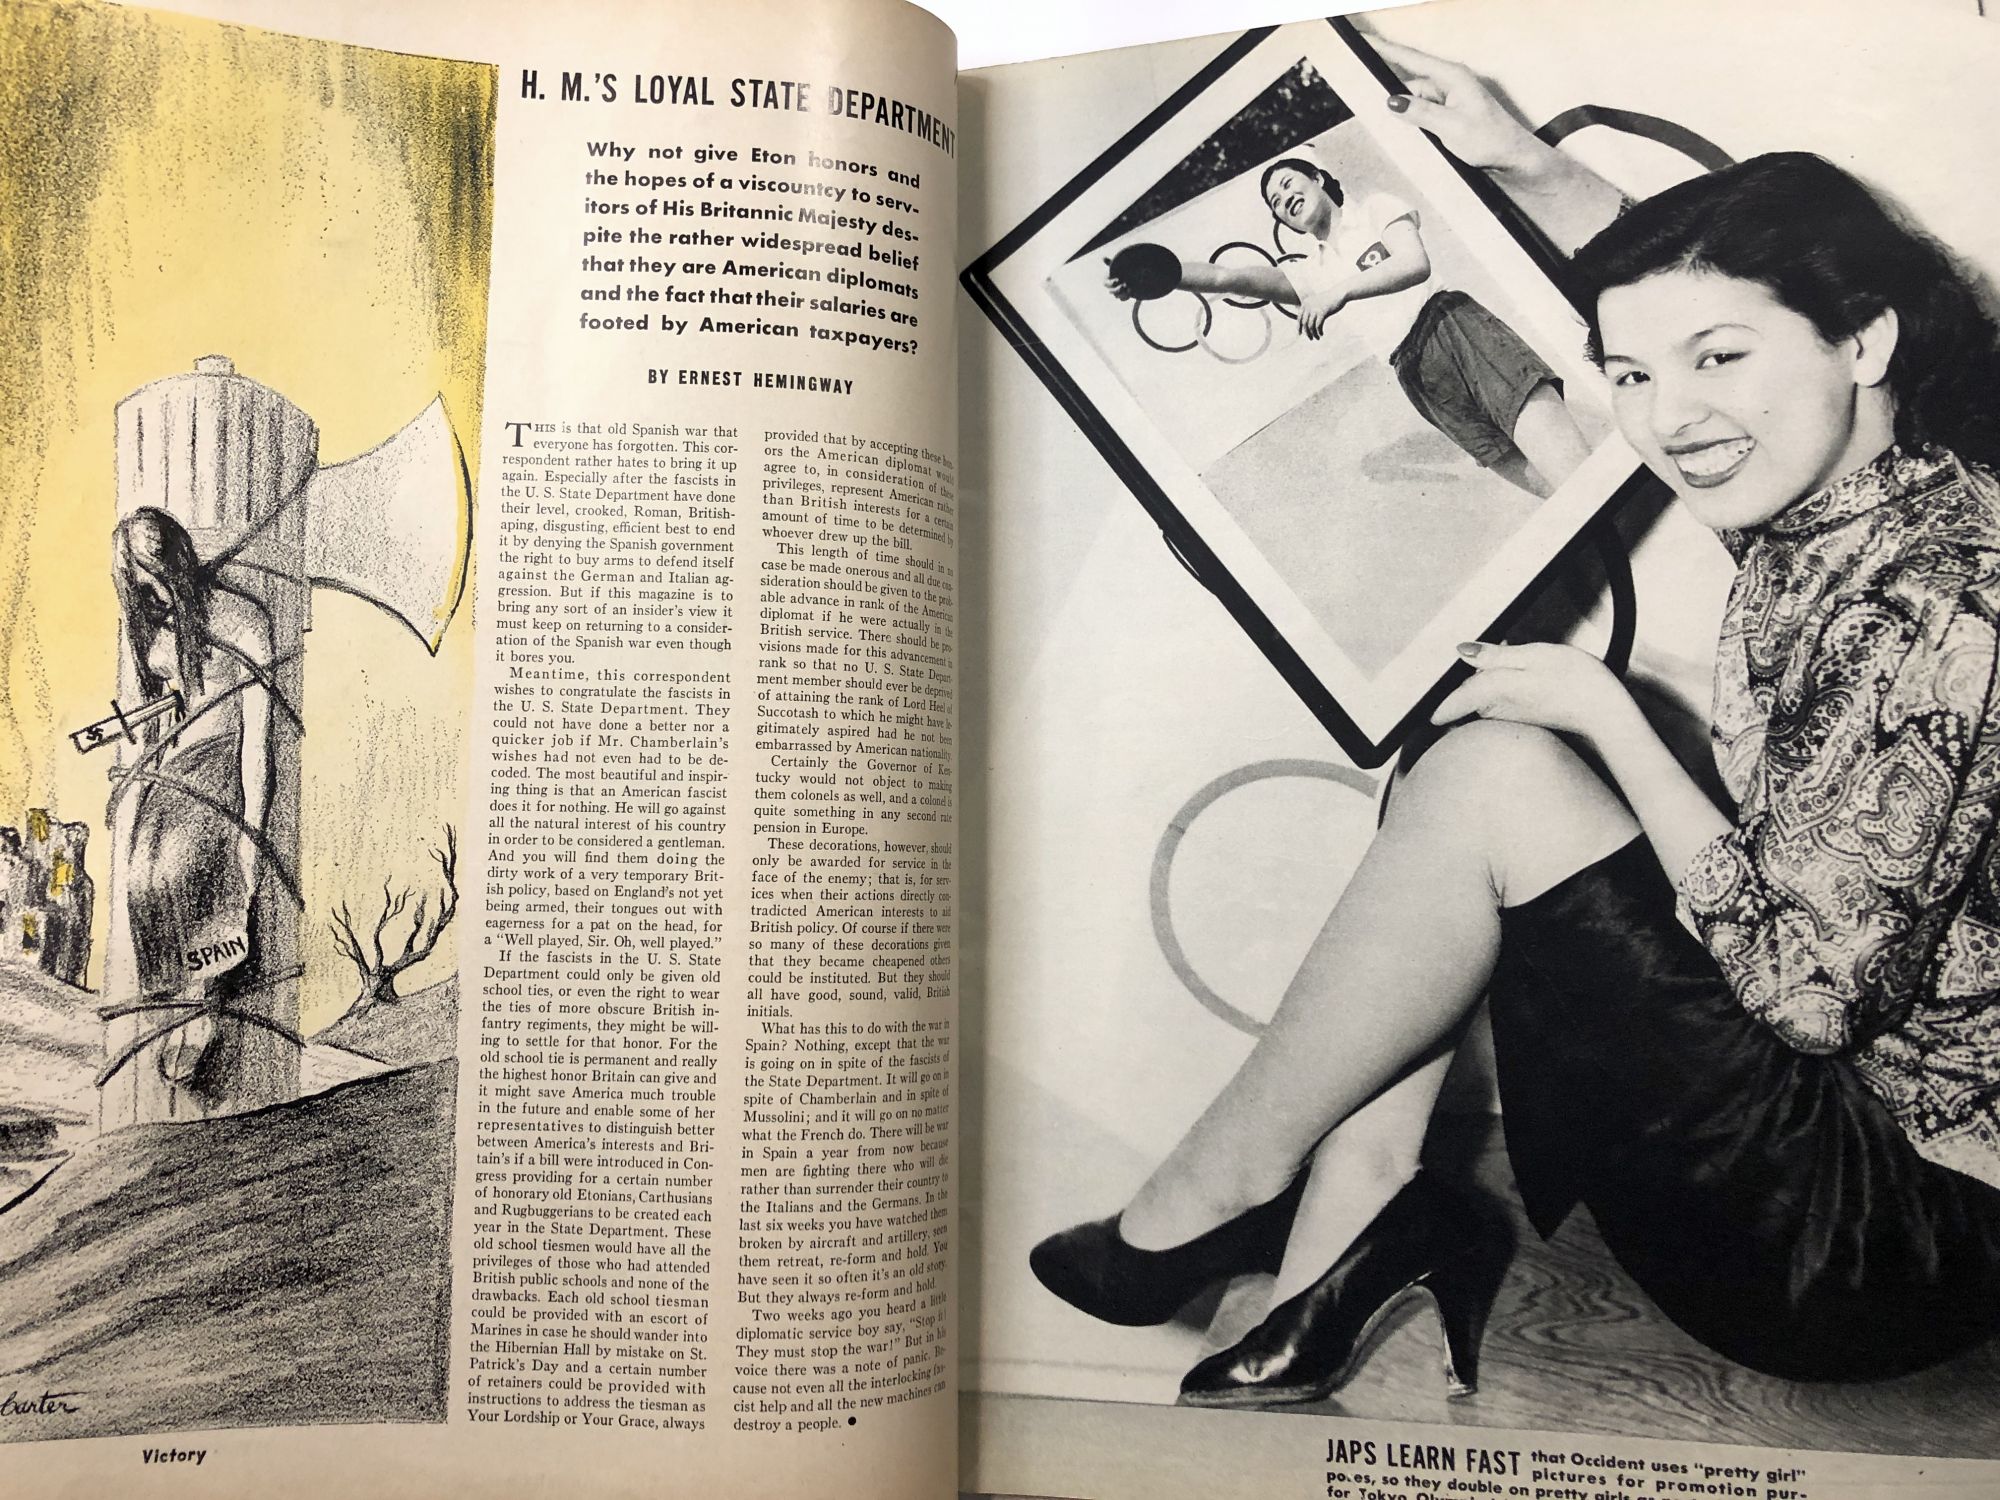 Ken magazine, June 16th, Vol. 1 No. 6, 1938 With Hemingway's H.M.'s Loyal  State Department by Ernest Hemingway on Common Crow Books